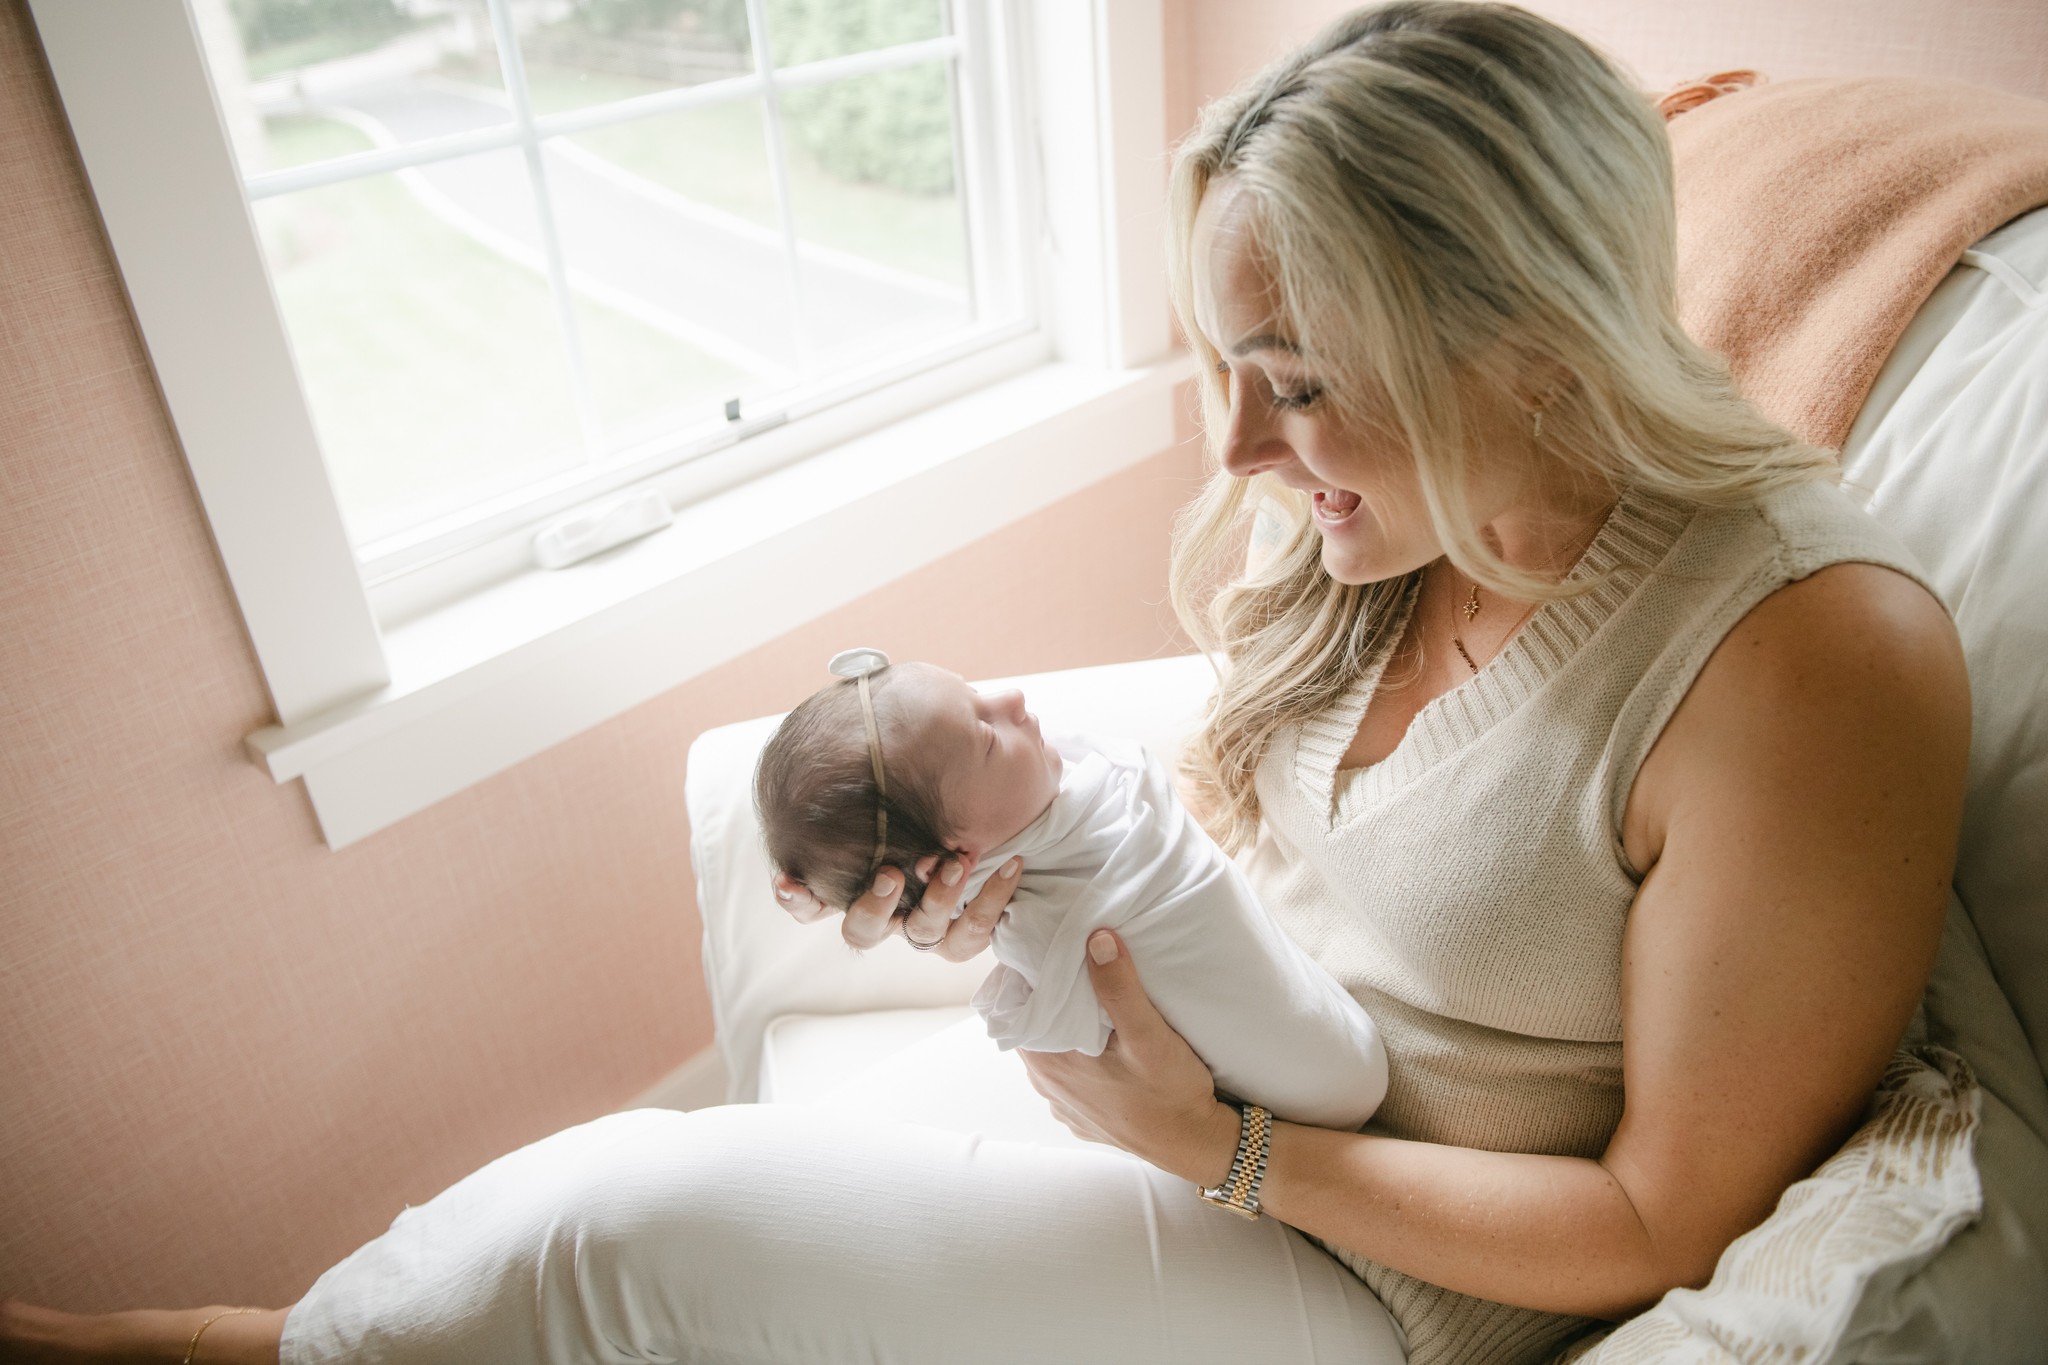 A new mom sits in a nursery chair in a pink room by a window smiling down at her newborn baby in her hands downington obgyn